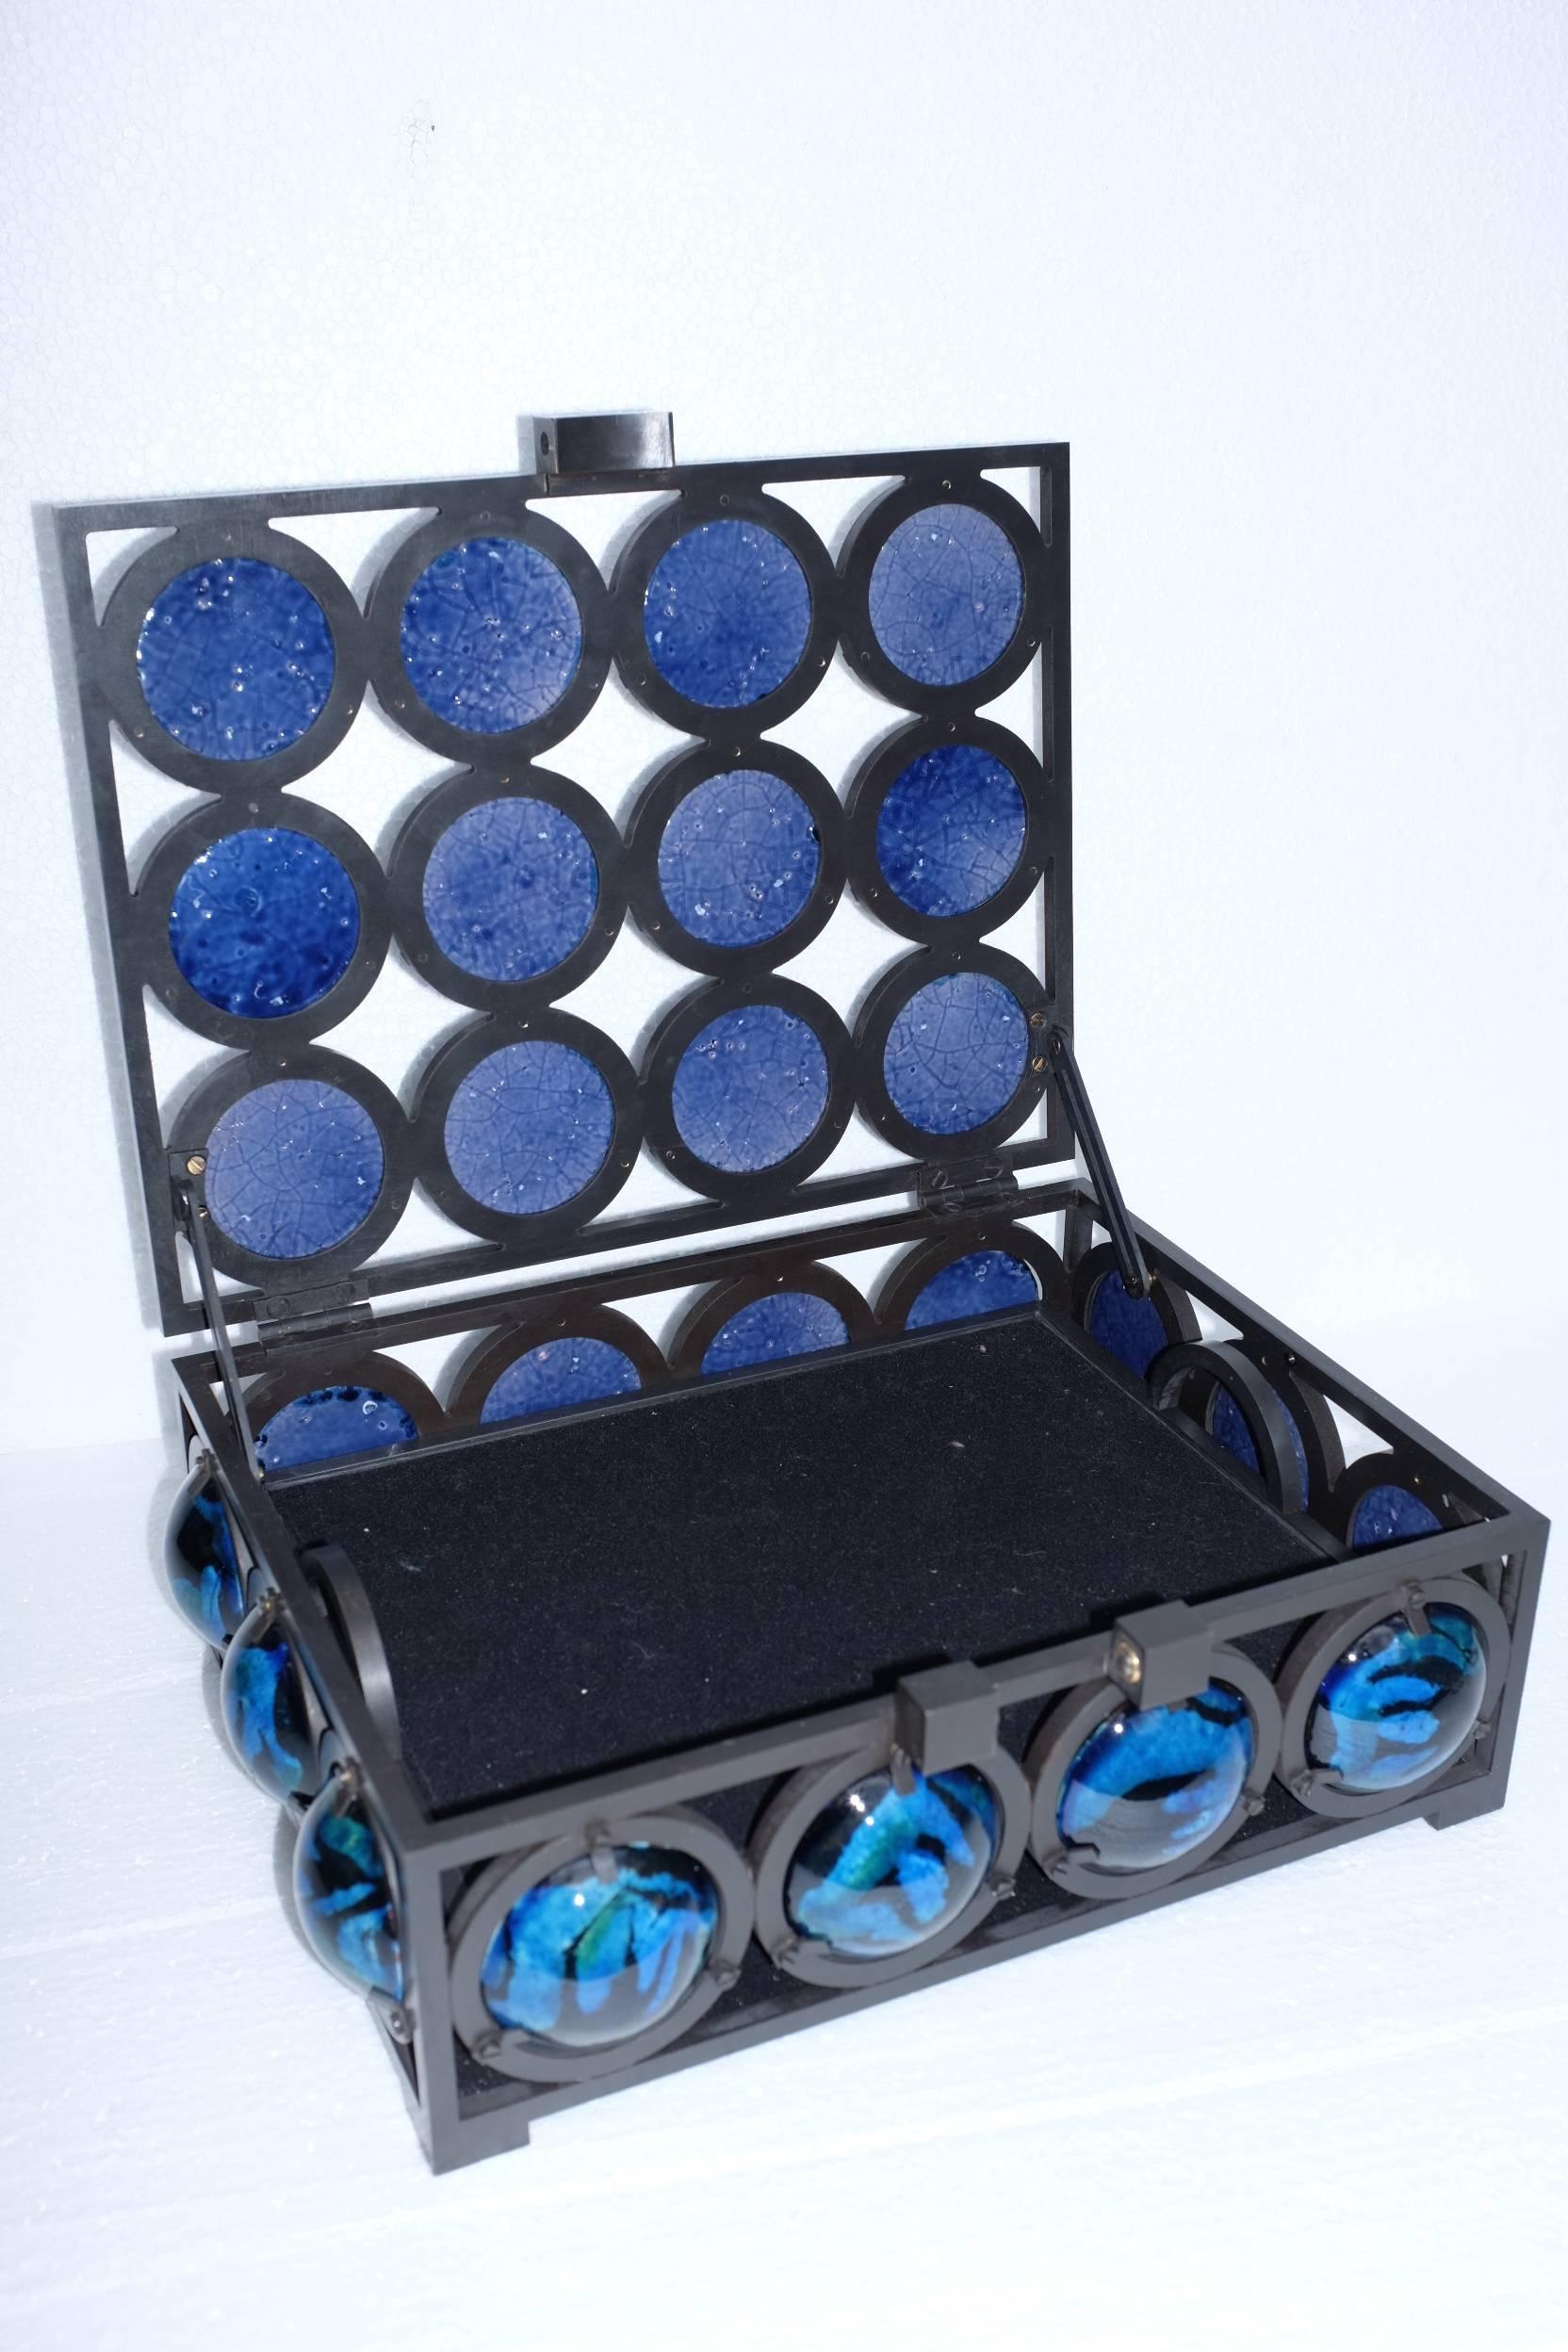 Christophe Côme's blue lava jewel box from 2014 is made of iron and hand-glazed blue lava stone roundels. This jewel box contains one interior removable tray. 

Côme works in Paris, France. Raised in an artistic family, his uncle is a renowned